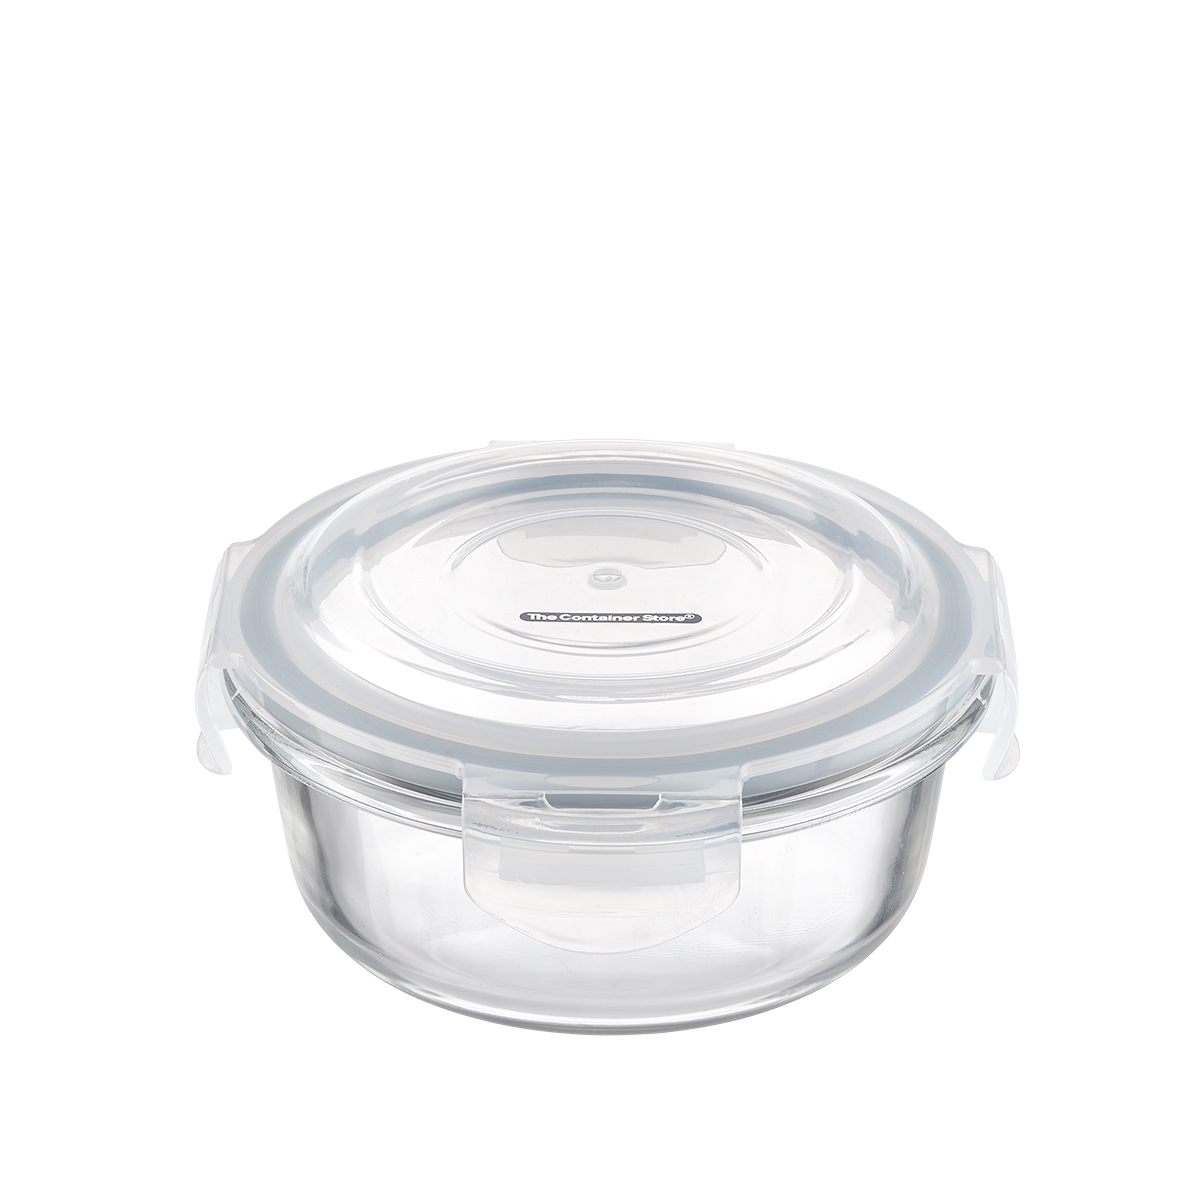 https://www.containerstore.com/catalogimages/383228/10078989-borosilicate-food-storage-r.jpg